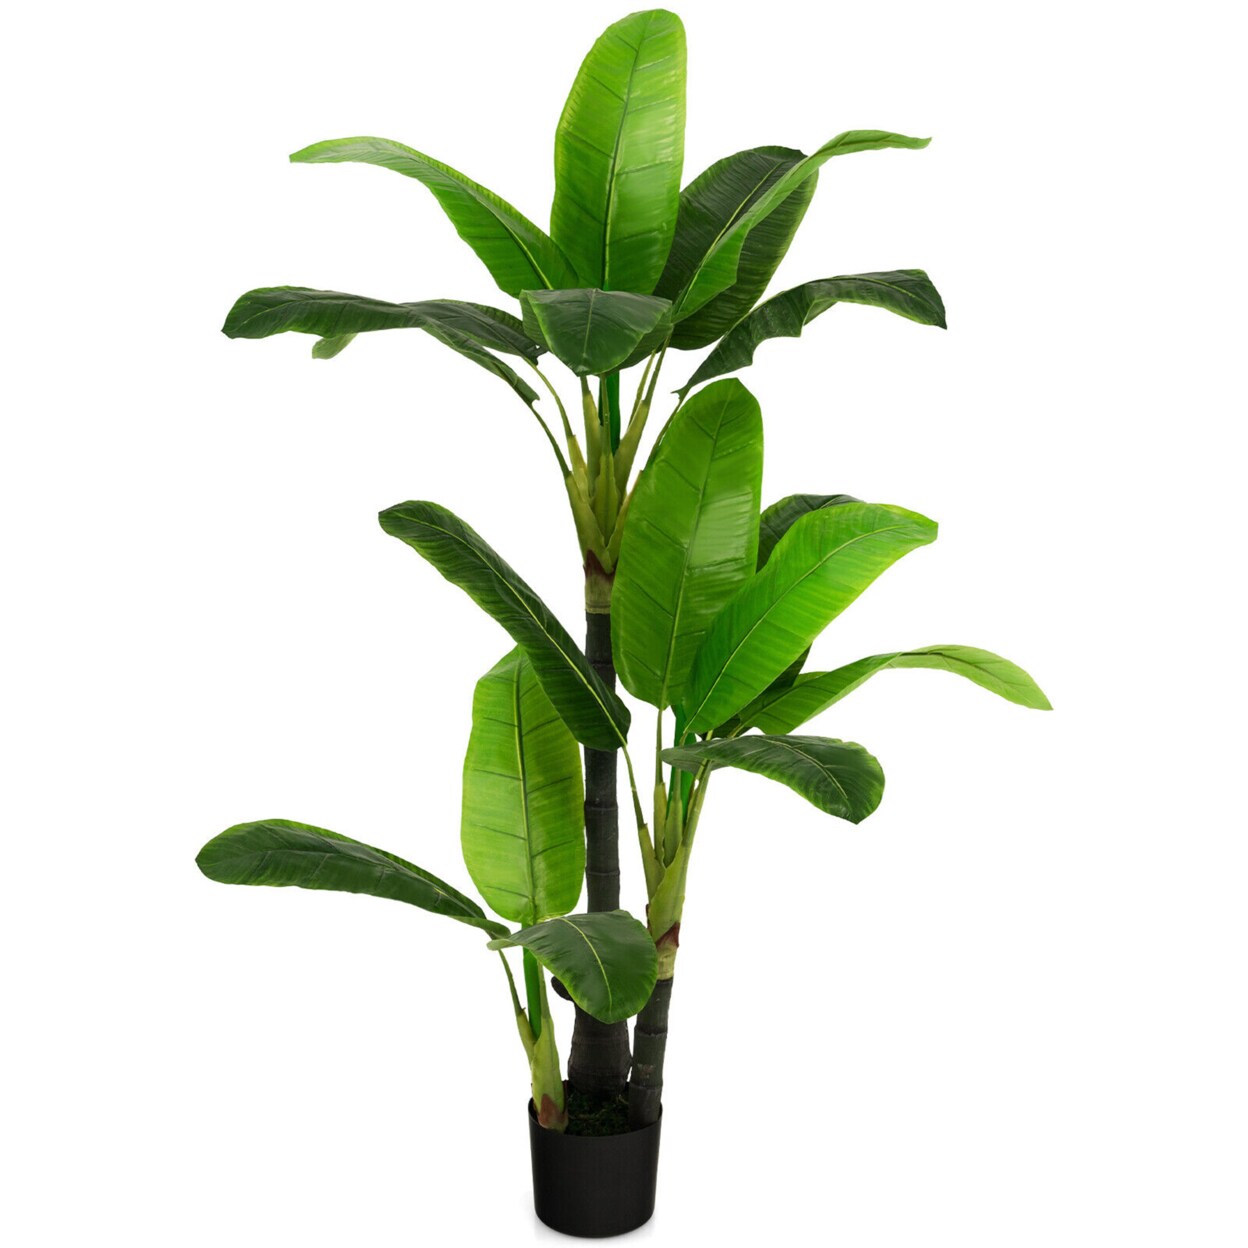 Gymax 5 FT Artificial Tree Fake Banana Plant Faux Tropical Tree for Indoor and Outdoor